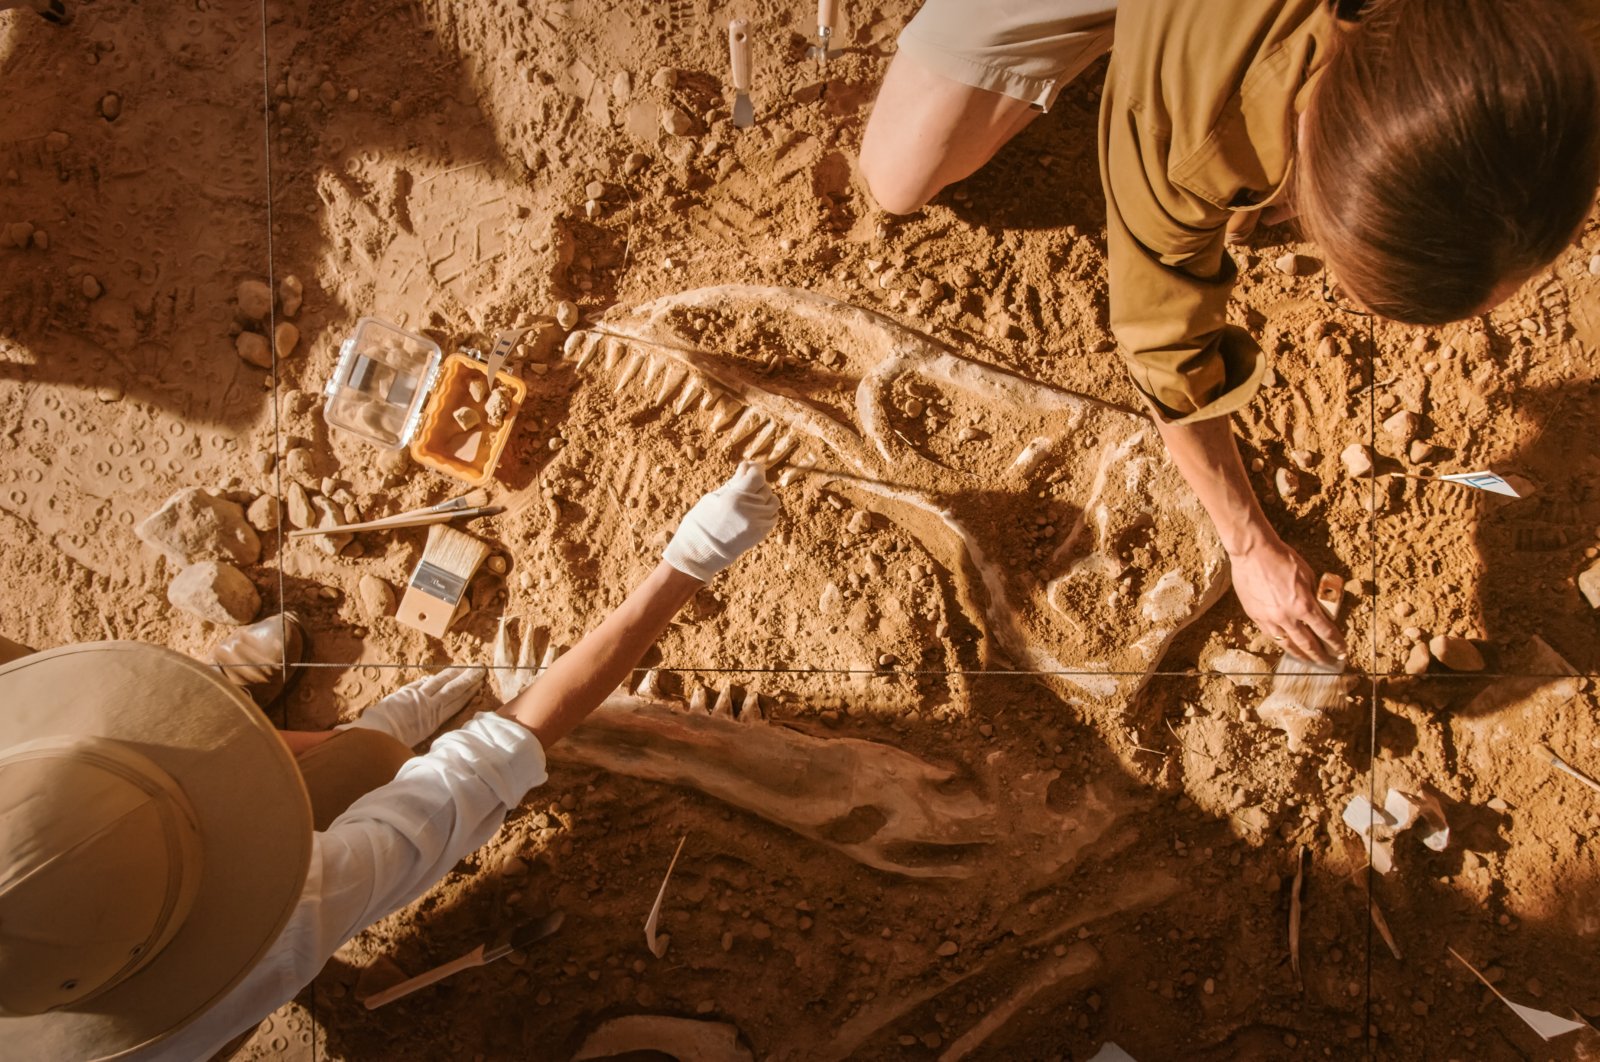 Turkish-European Archaeology Days will reveal backstage of archaeological research with various events. (Shutterstock)